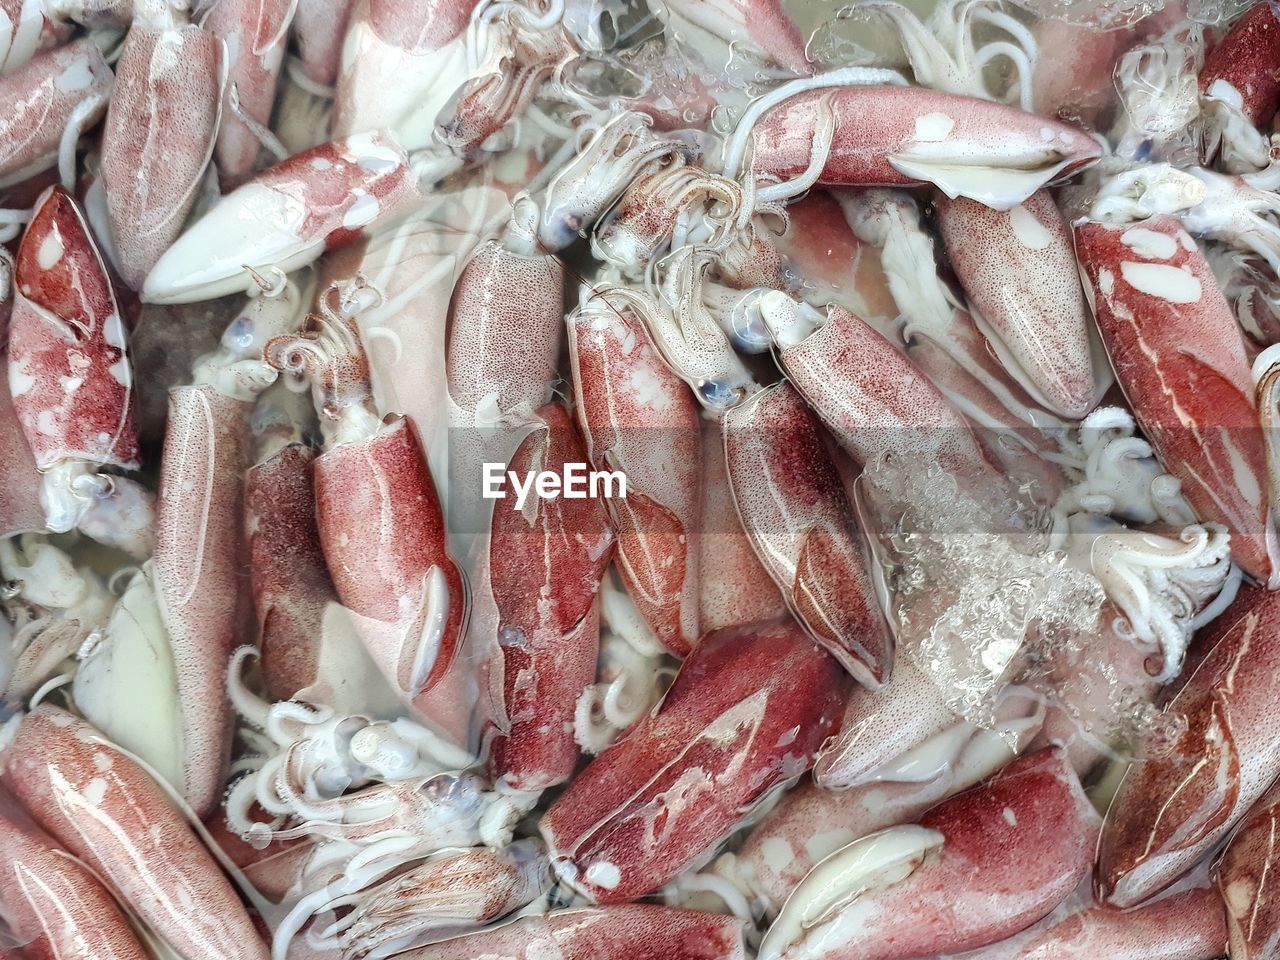 CLOSE-UP OF FISH FOR SALE IN MARKET